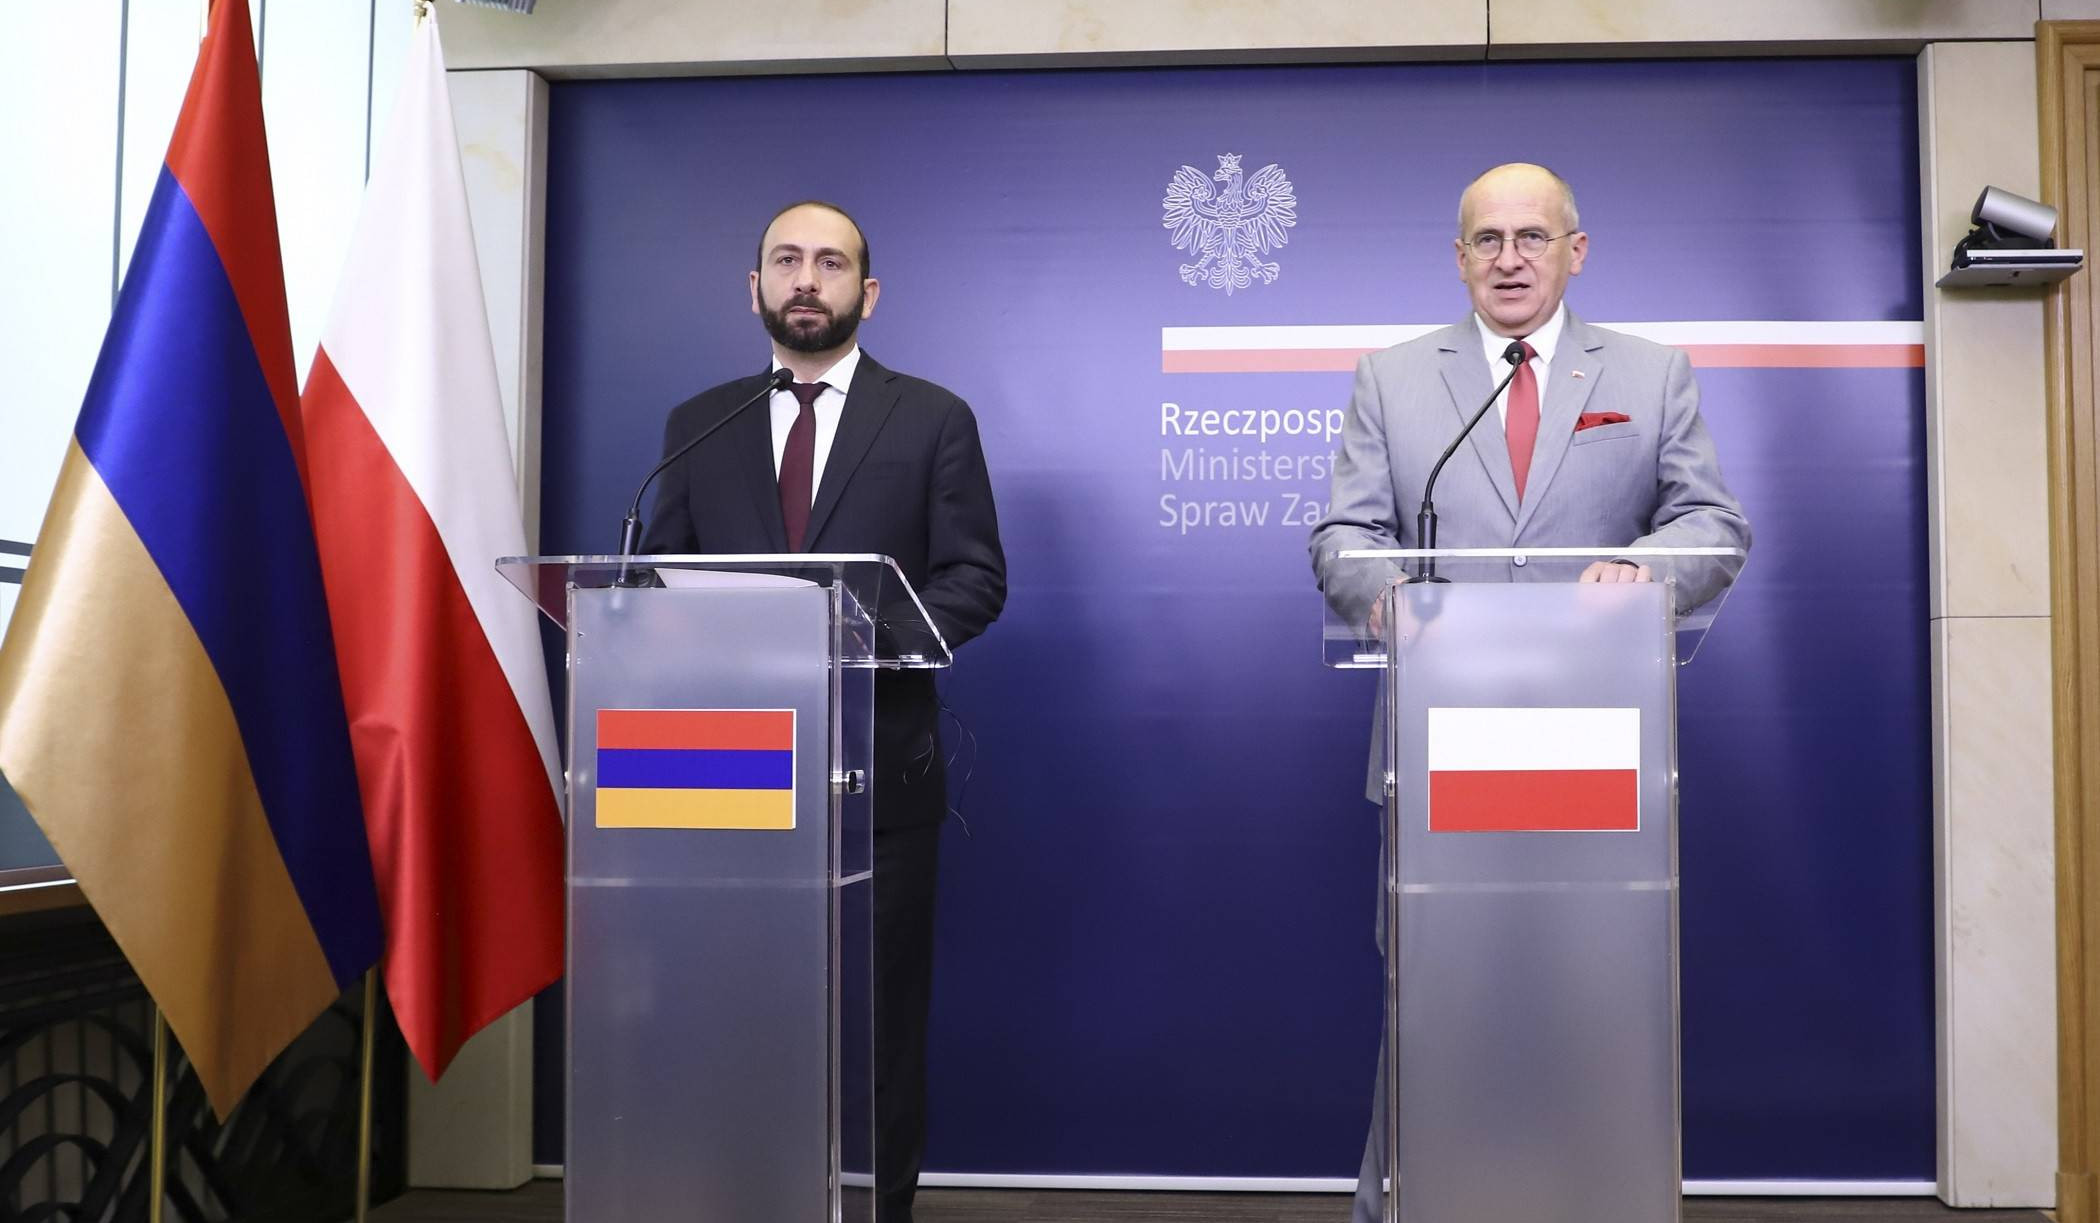 Press statement of Foreign Minister of Armenia Ararat Mirzoyan following meeting with Foreign Minister of Poland Zbigniew Rau